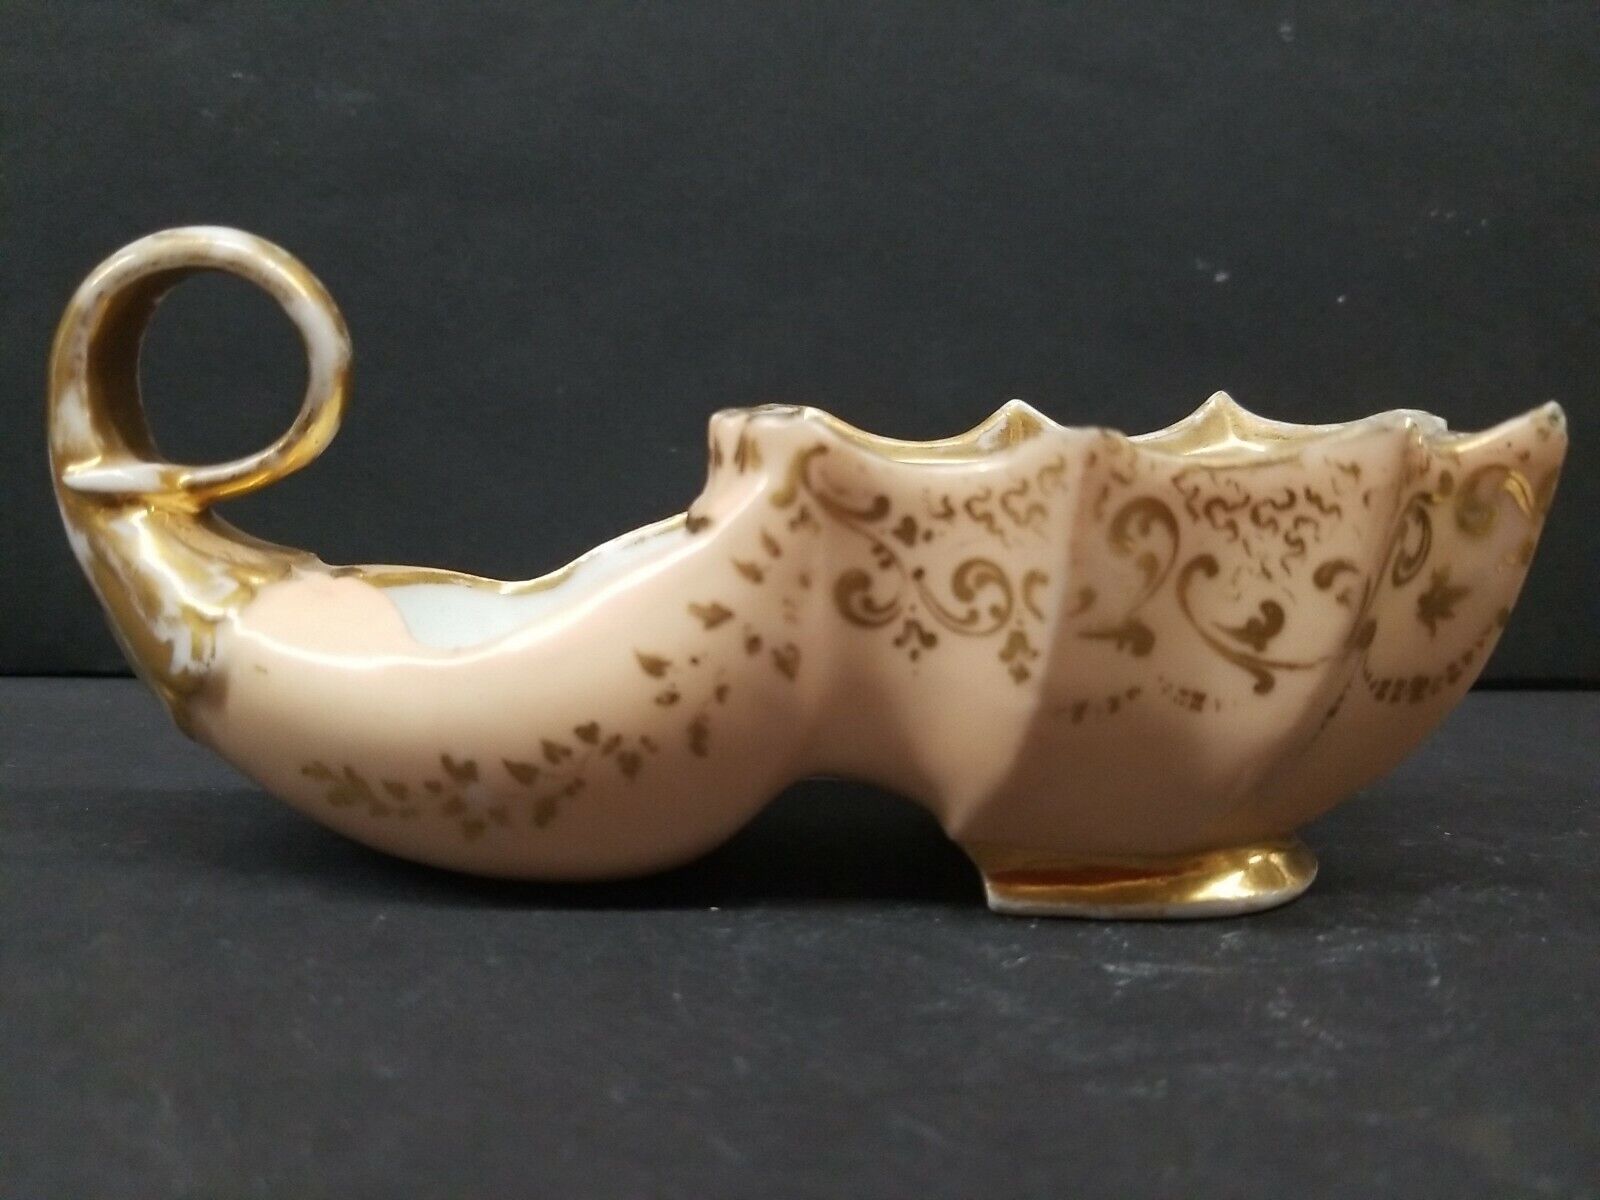 Inkwell 19th C Painted & Gilt Shoe Shape Missing Parts France Porcelain